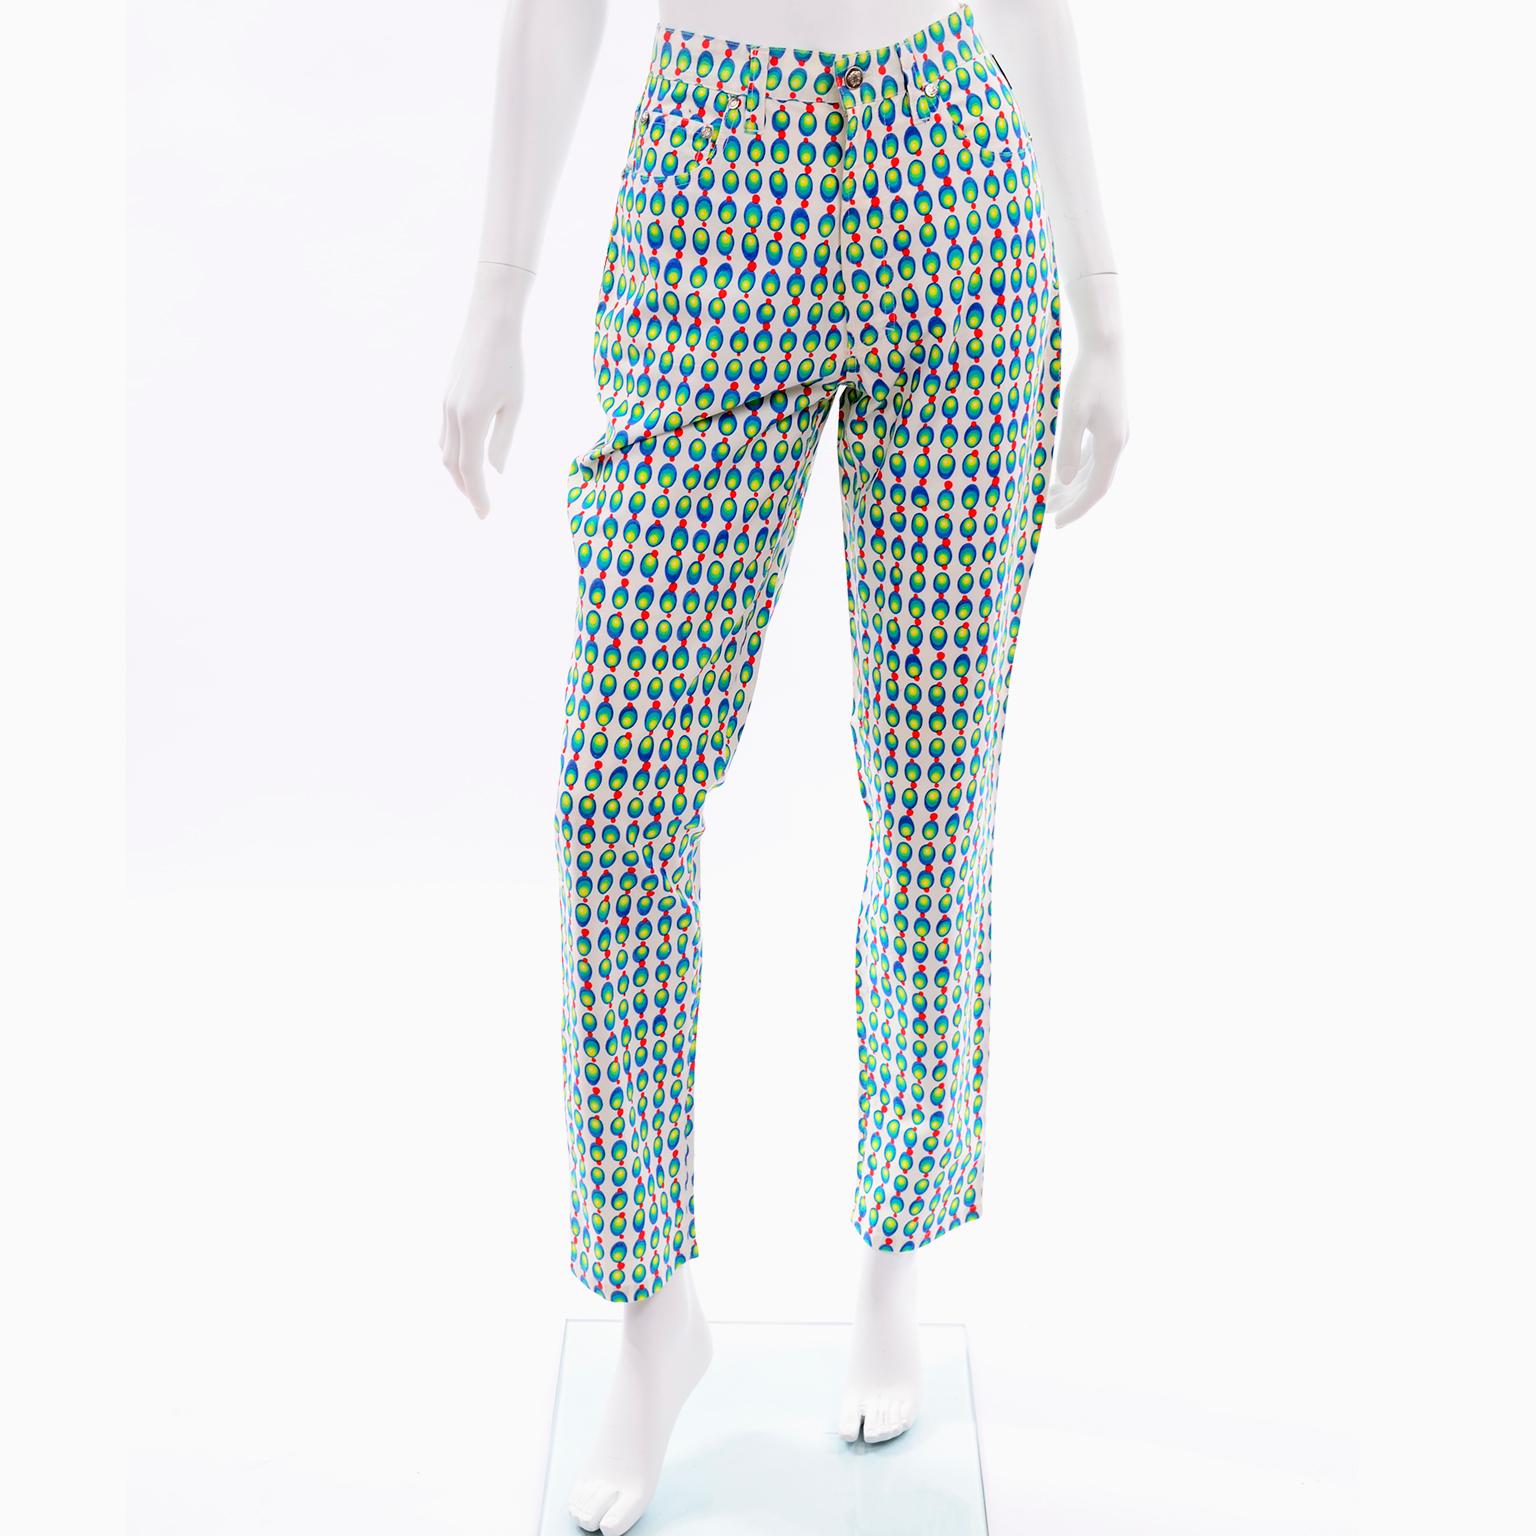 These are fabulous vintage jeans from the 1990s by Gianni Versace Jeans Couture. These peg legged  jeans are white with blue, green, red and yellow stylized circles that resemble abstract olives! High Waisted pants with the Versace monogram logo